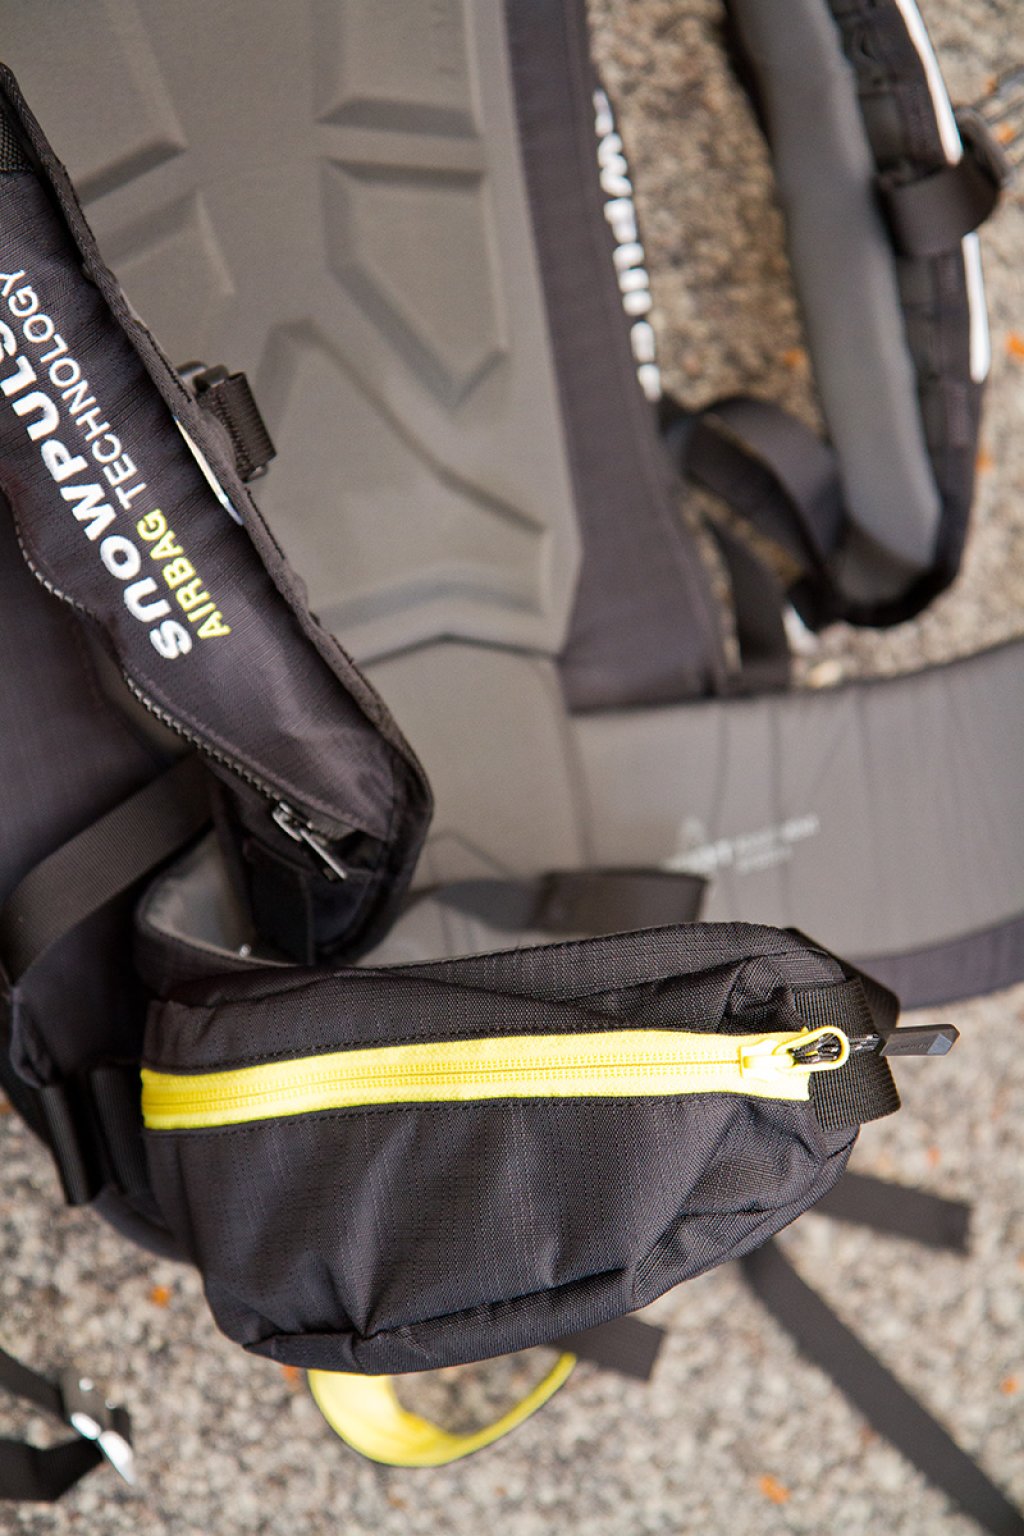 A side pocket on the hip belt provides quick access to useful small items.